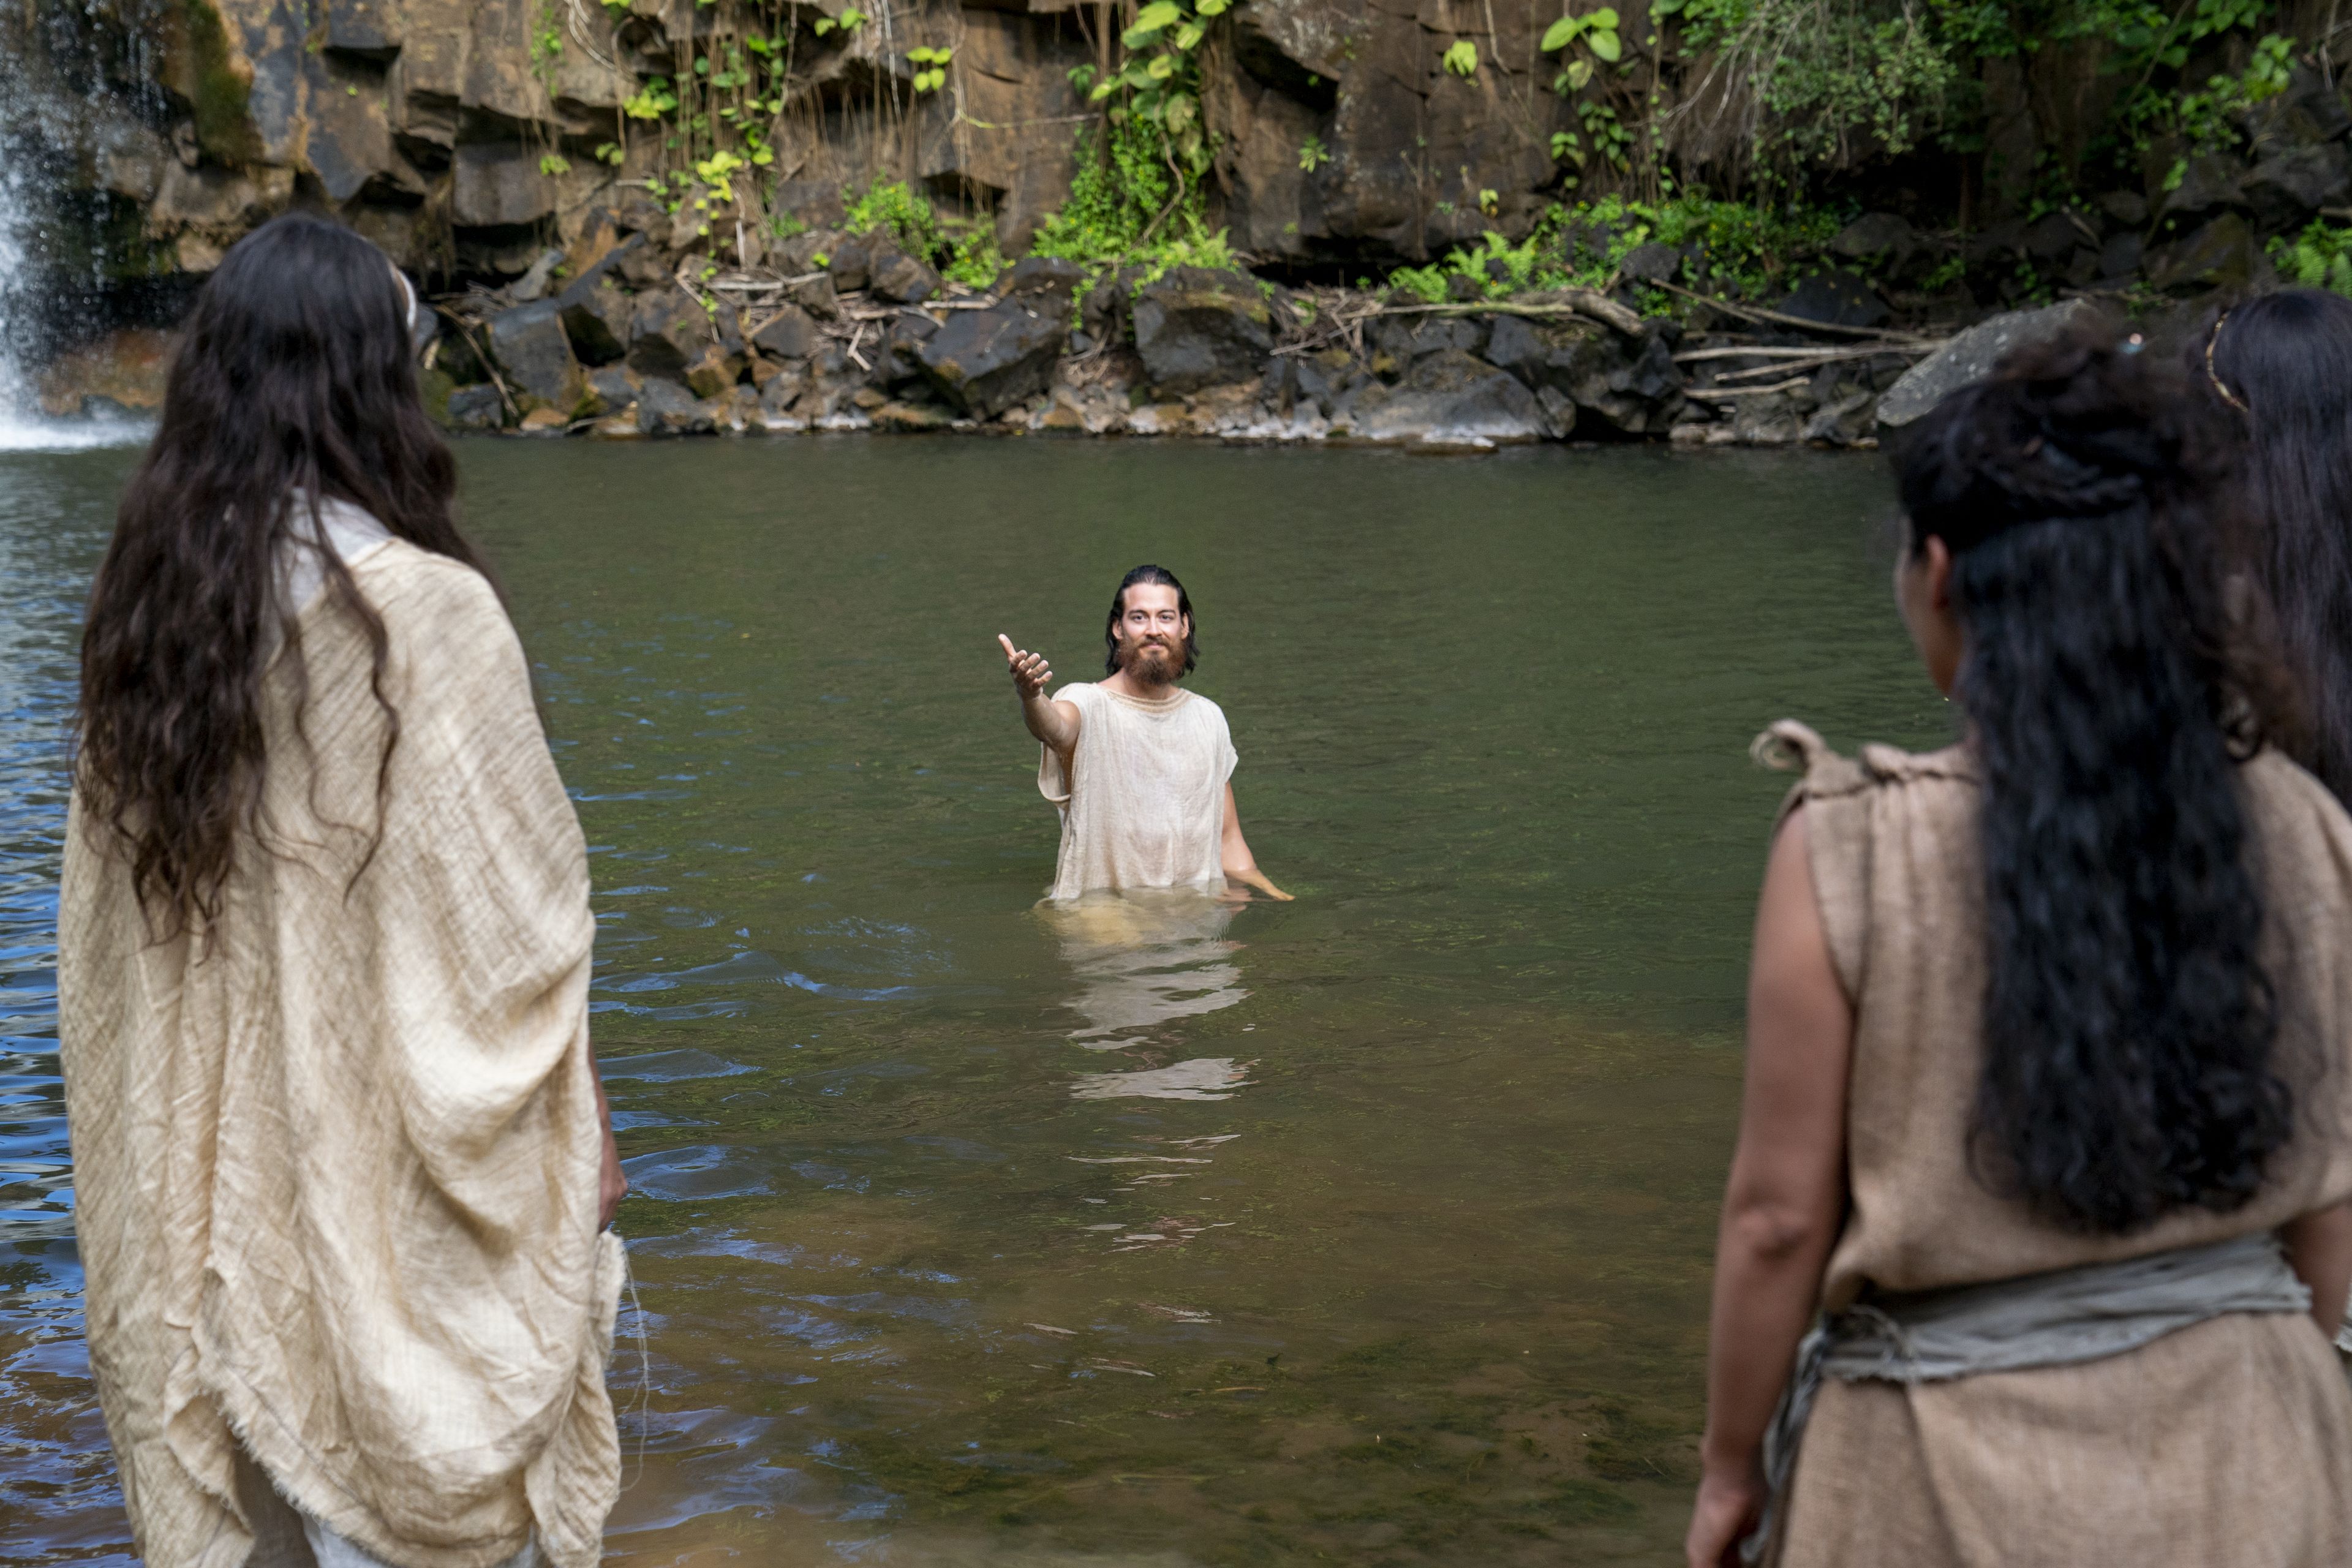 Alma baptizes people at the Waters of Mormon.